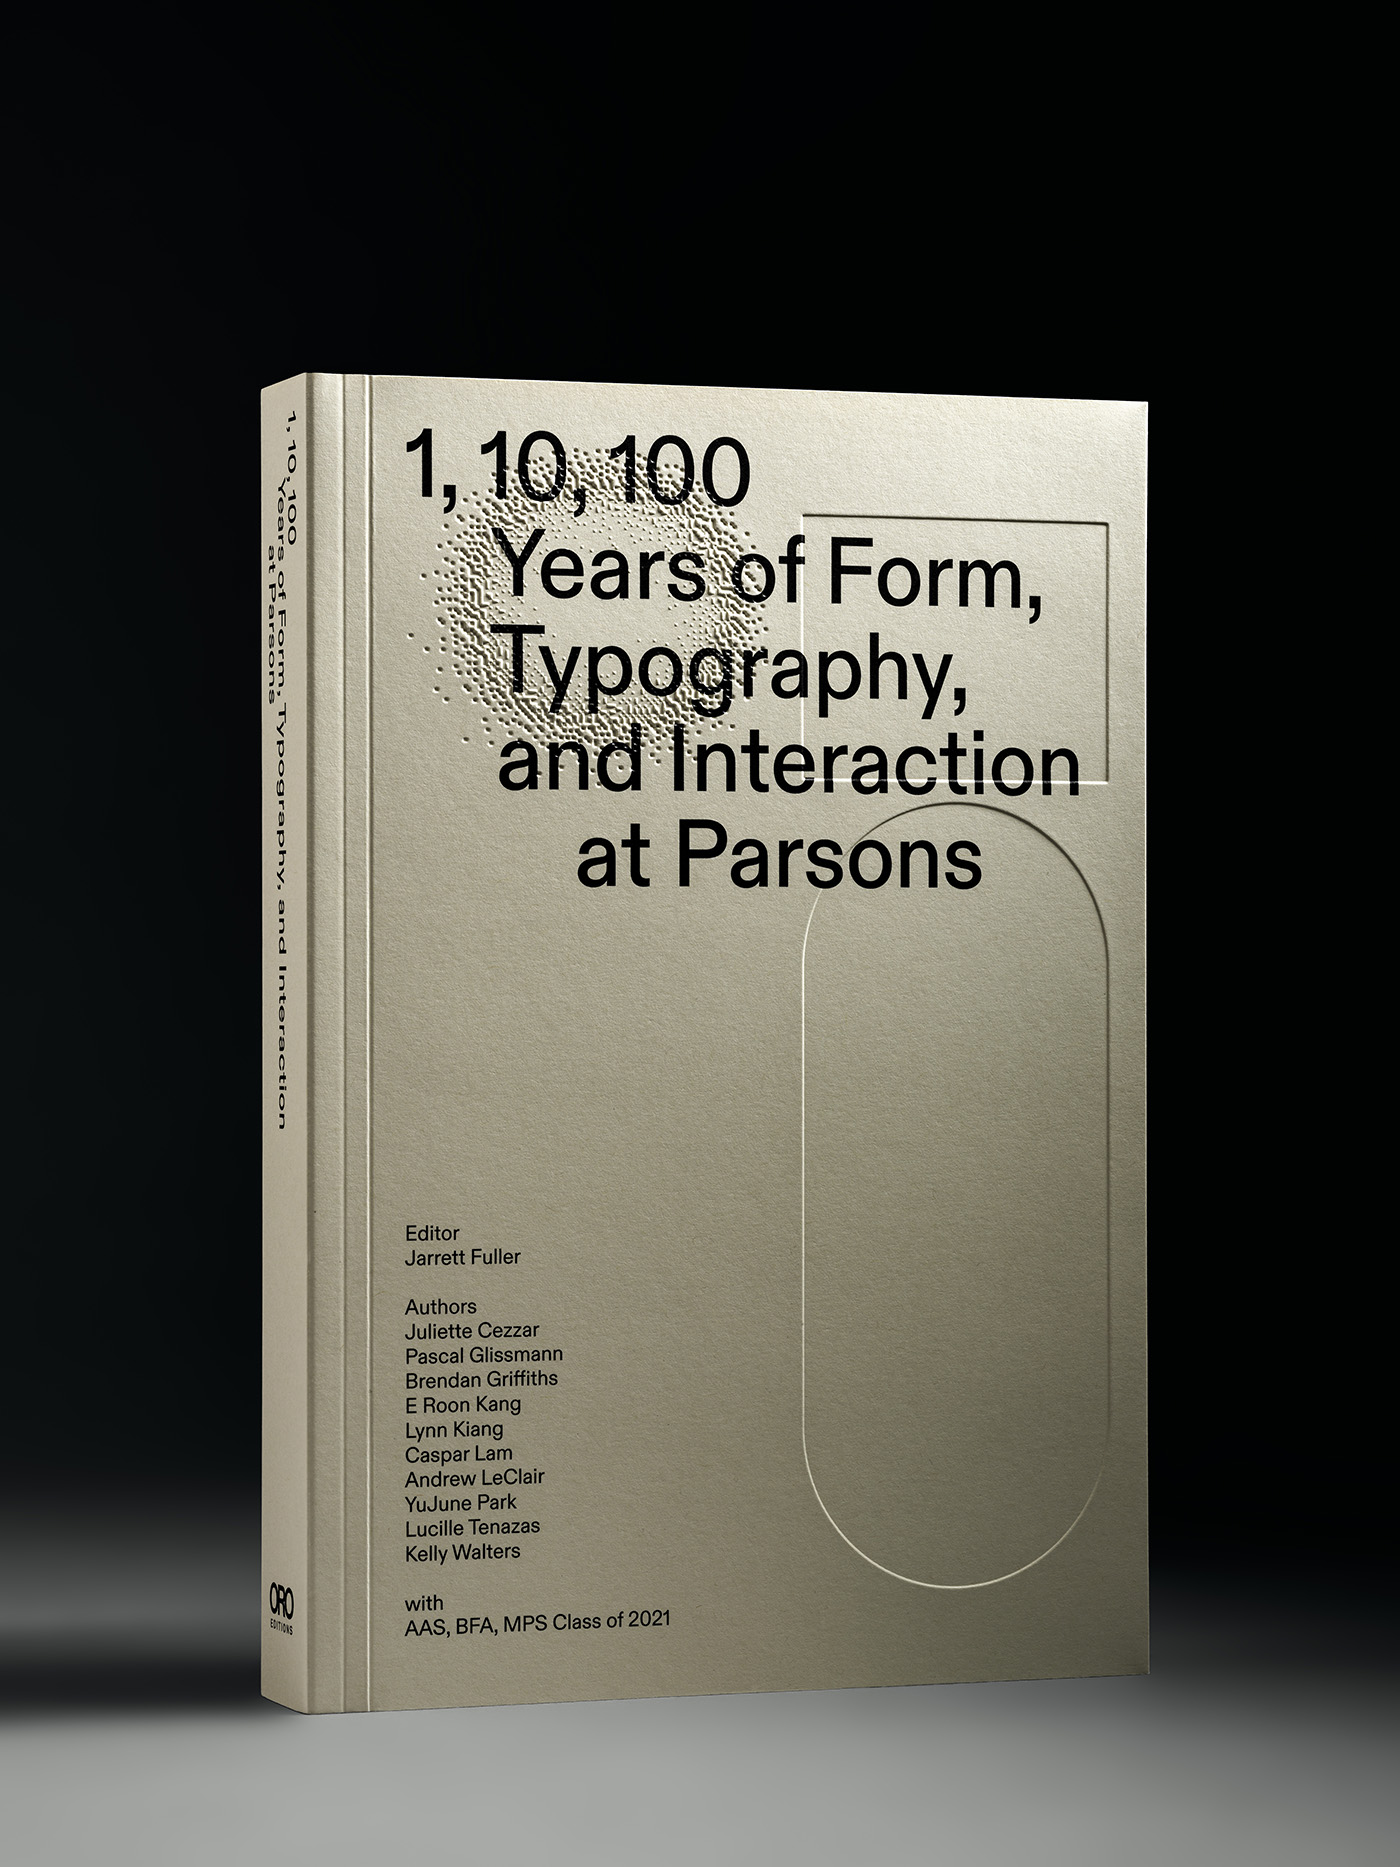 The new book serves as a retrospective on the evolving nature of communication design seen through the unique pedagogical lens and work of the teachers and students at Parsons